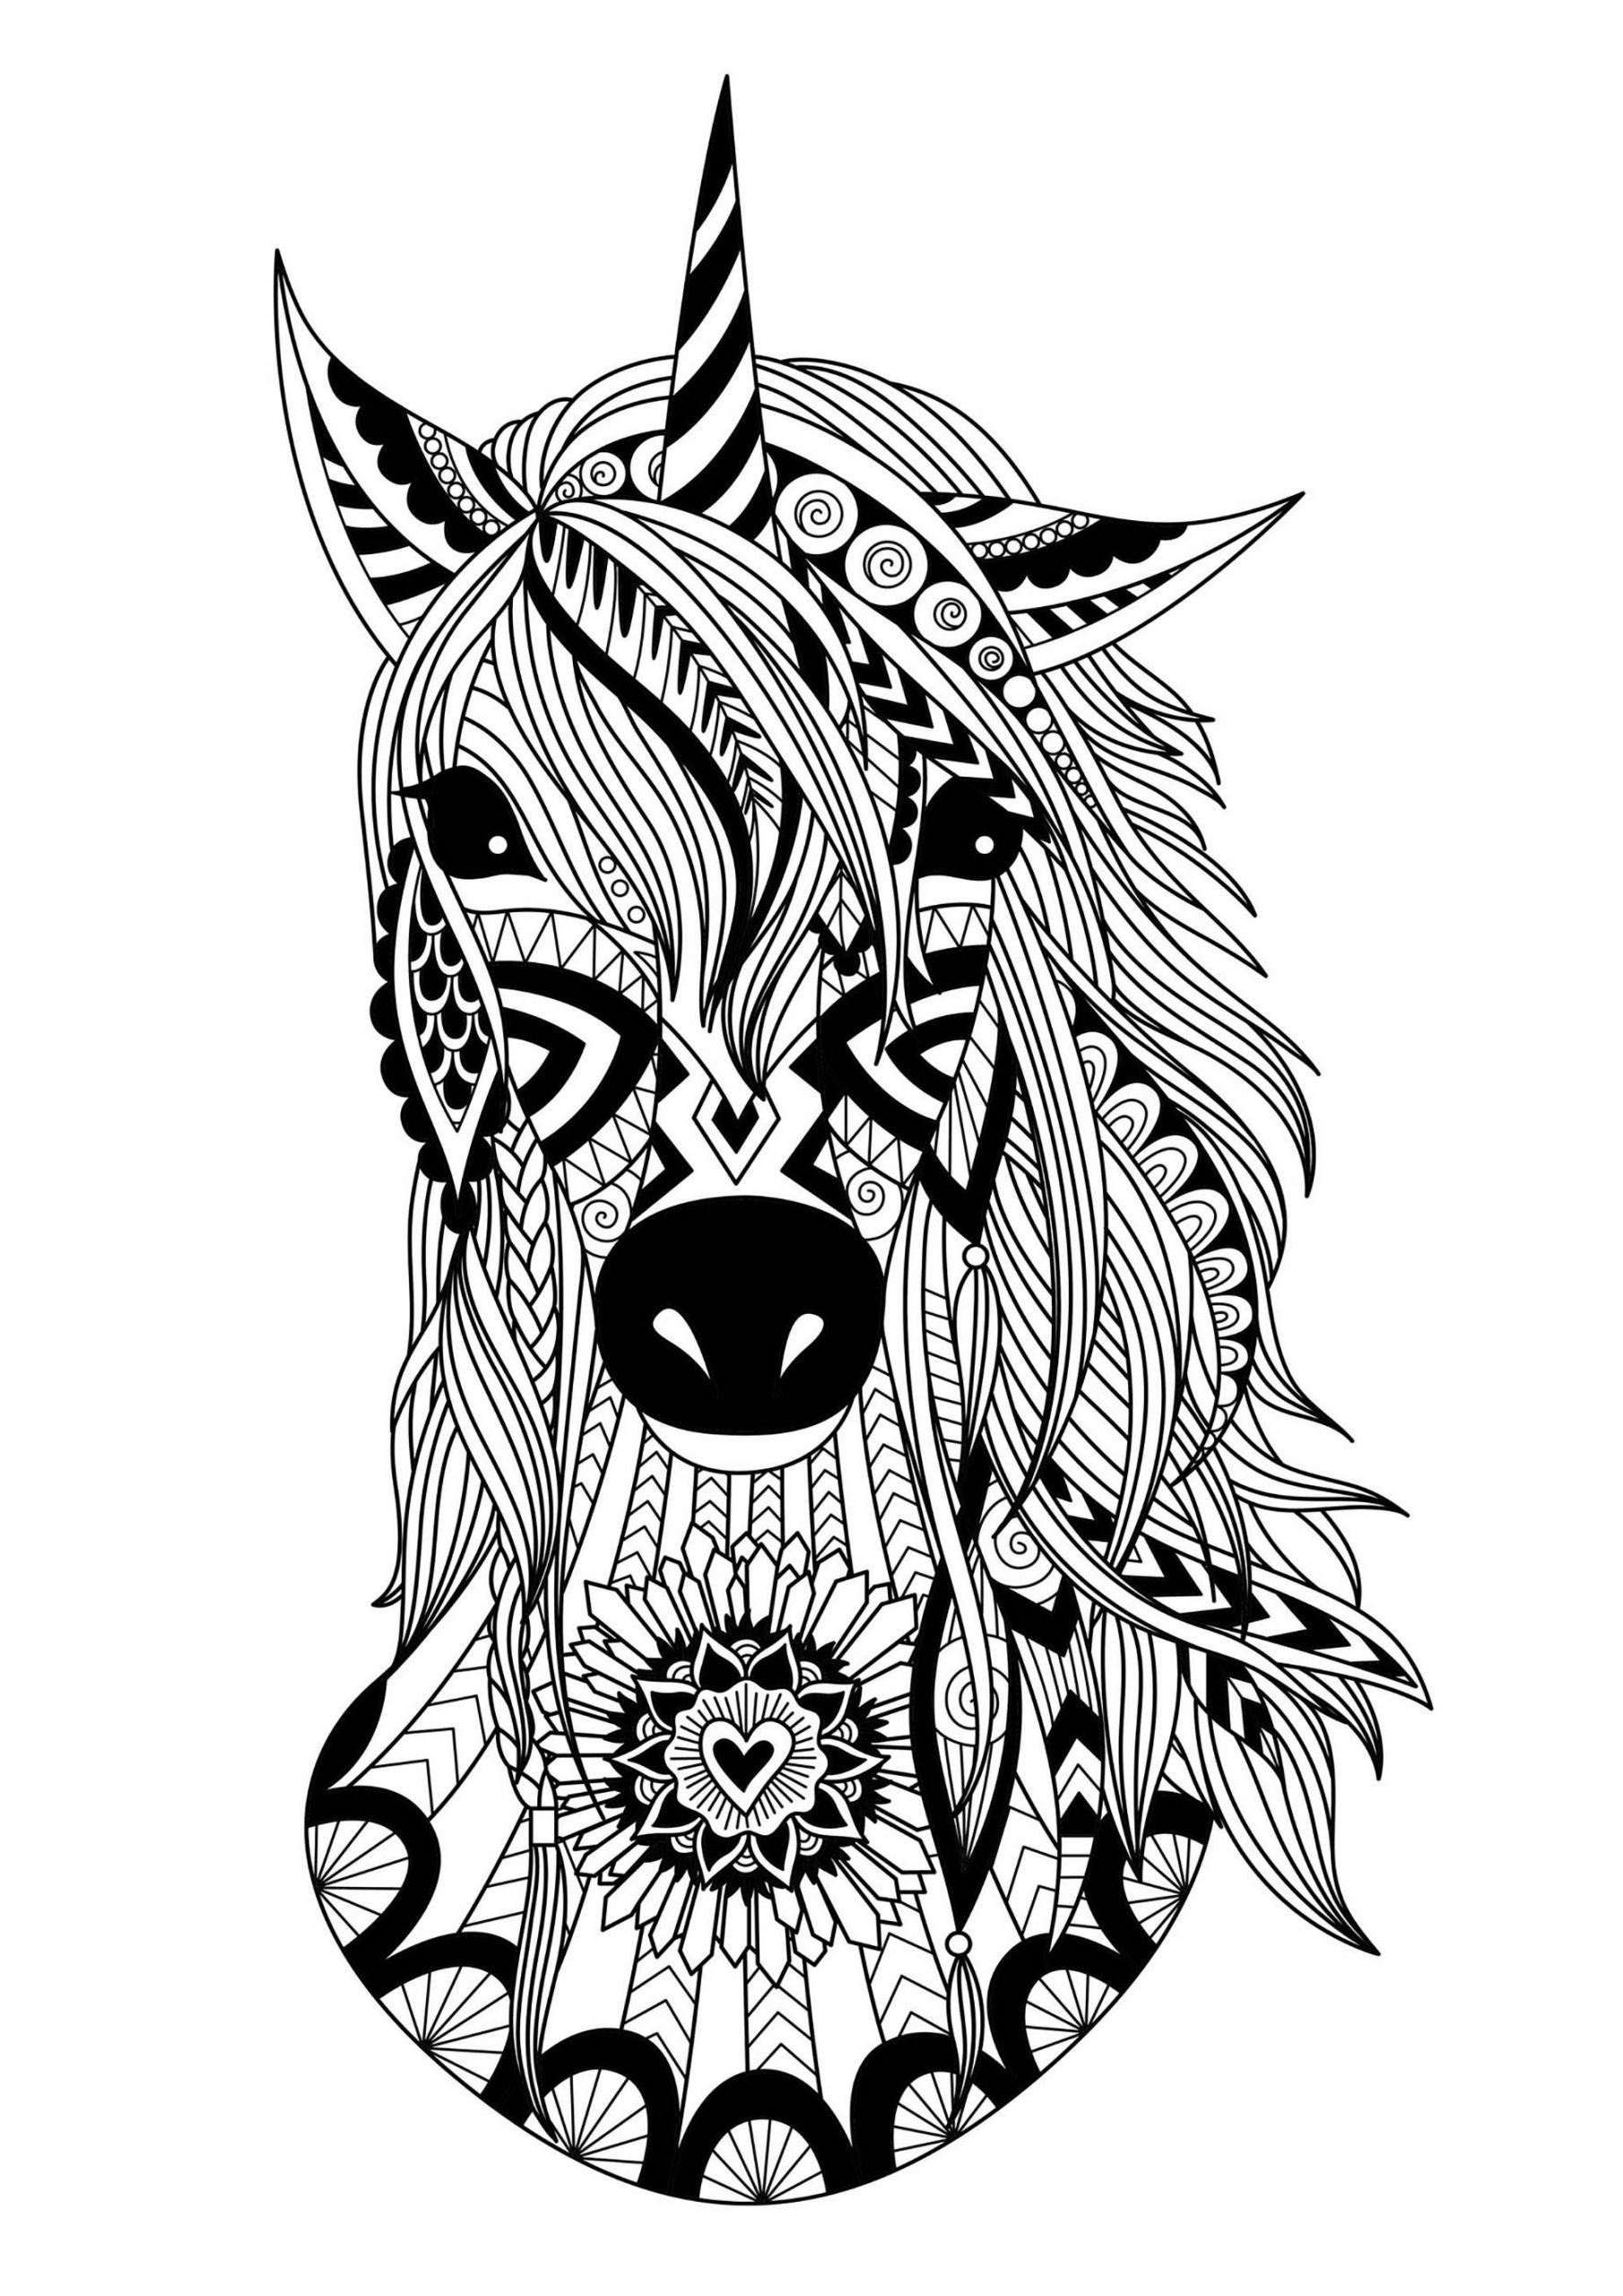 Unicorn Adult Coloring Book
 Unicorn zentangle simple Unicorns Adult Coloring Pages